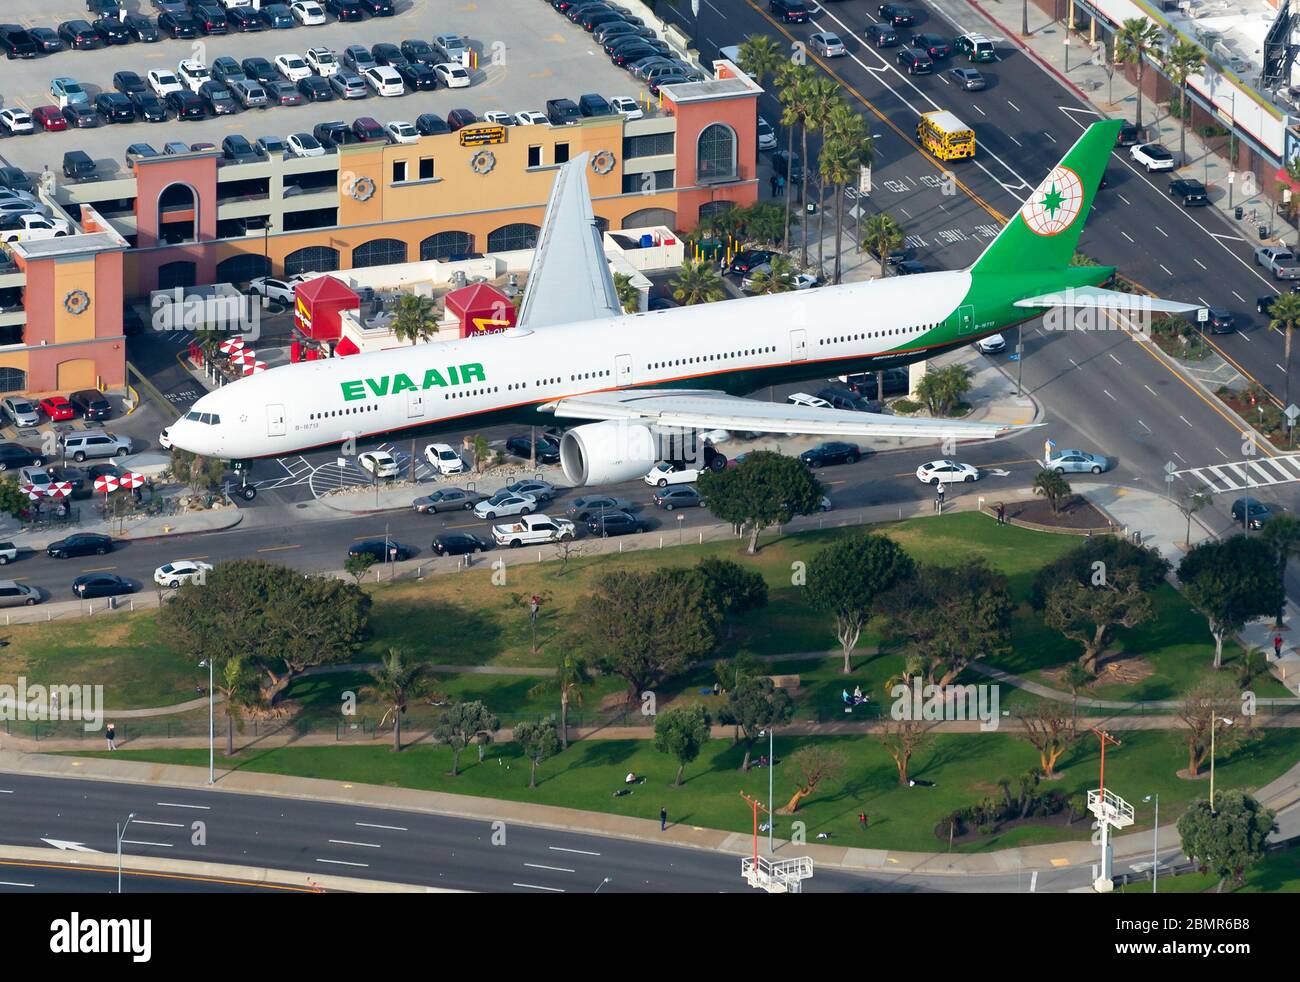 Eva Air Boeing 777 on final approach to Los Angeles International Airport. Aircraft registered as B-16713. B777 seen from above. High view. Stock Photo